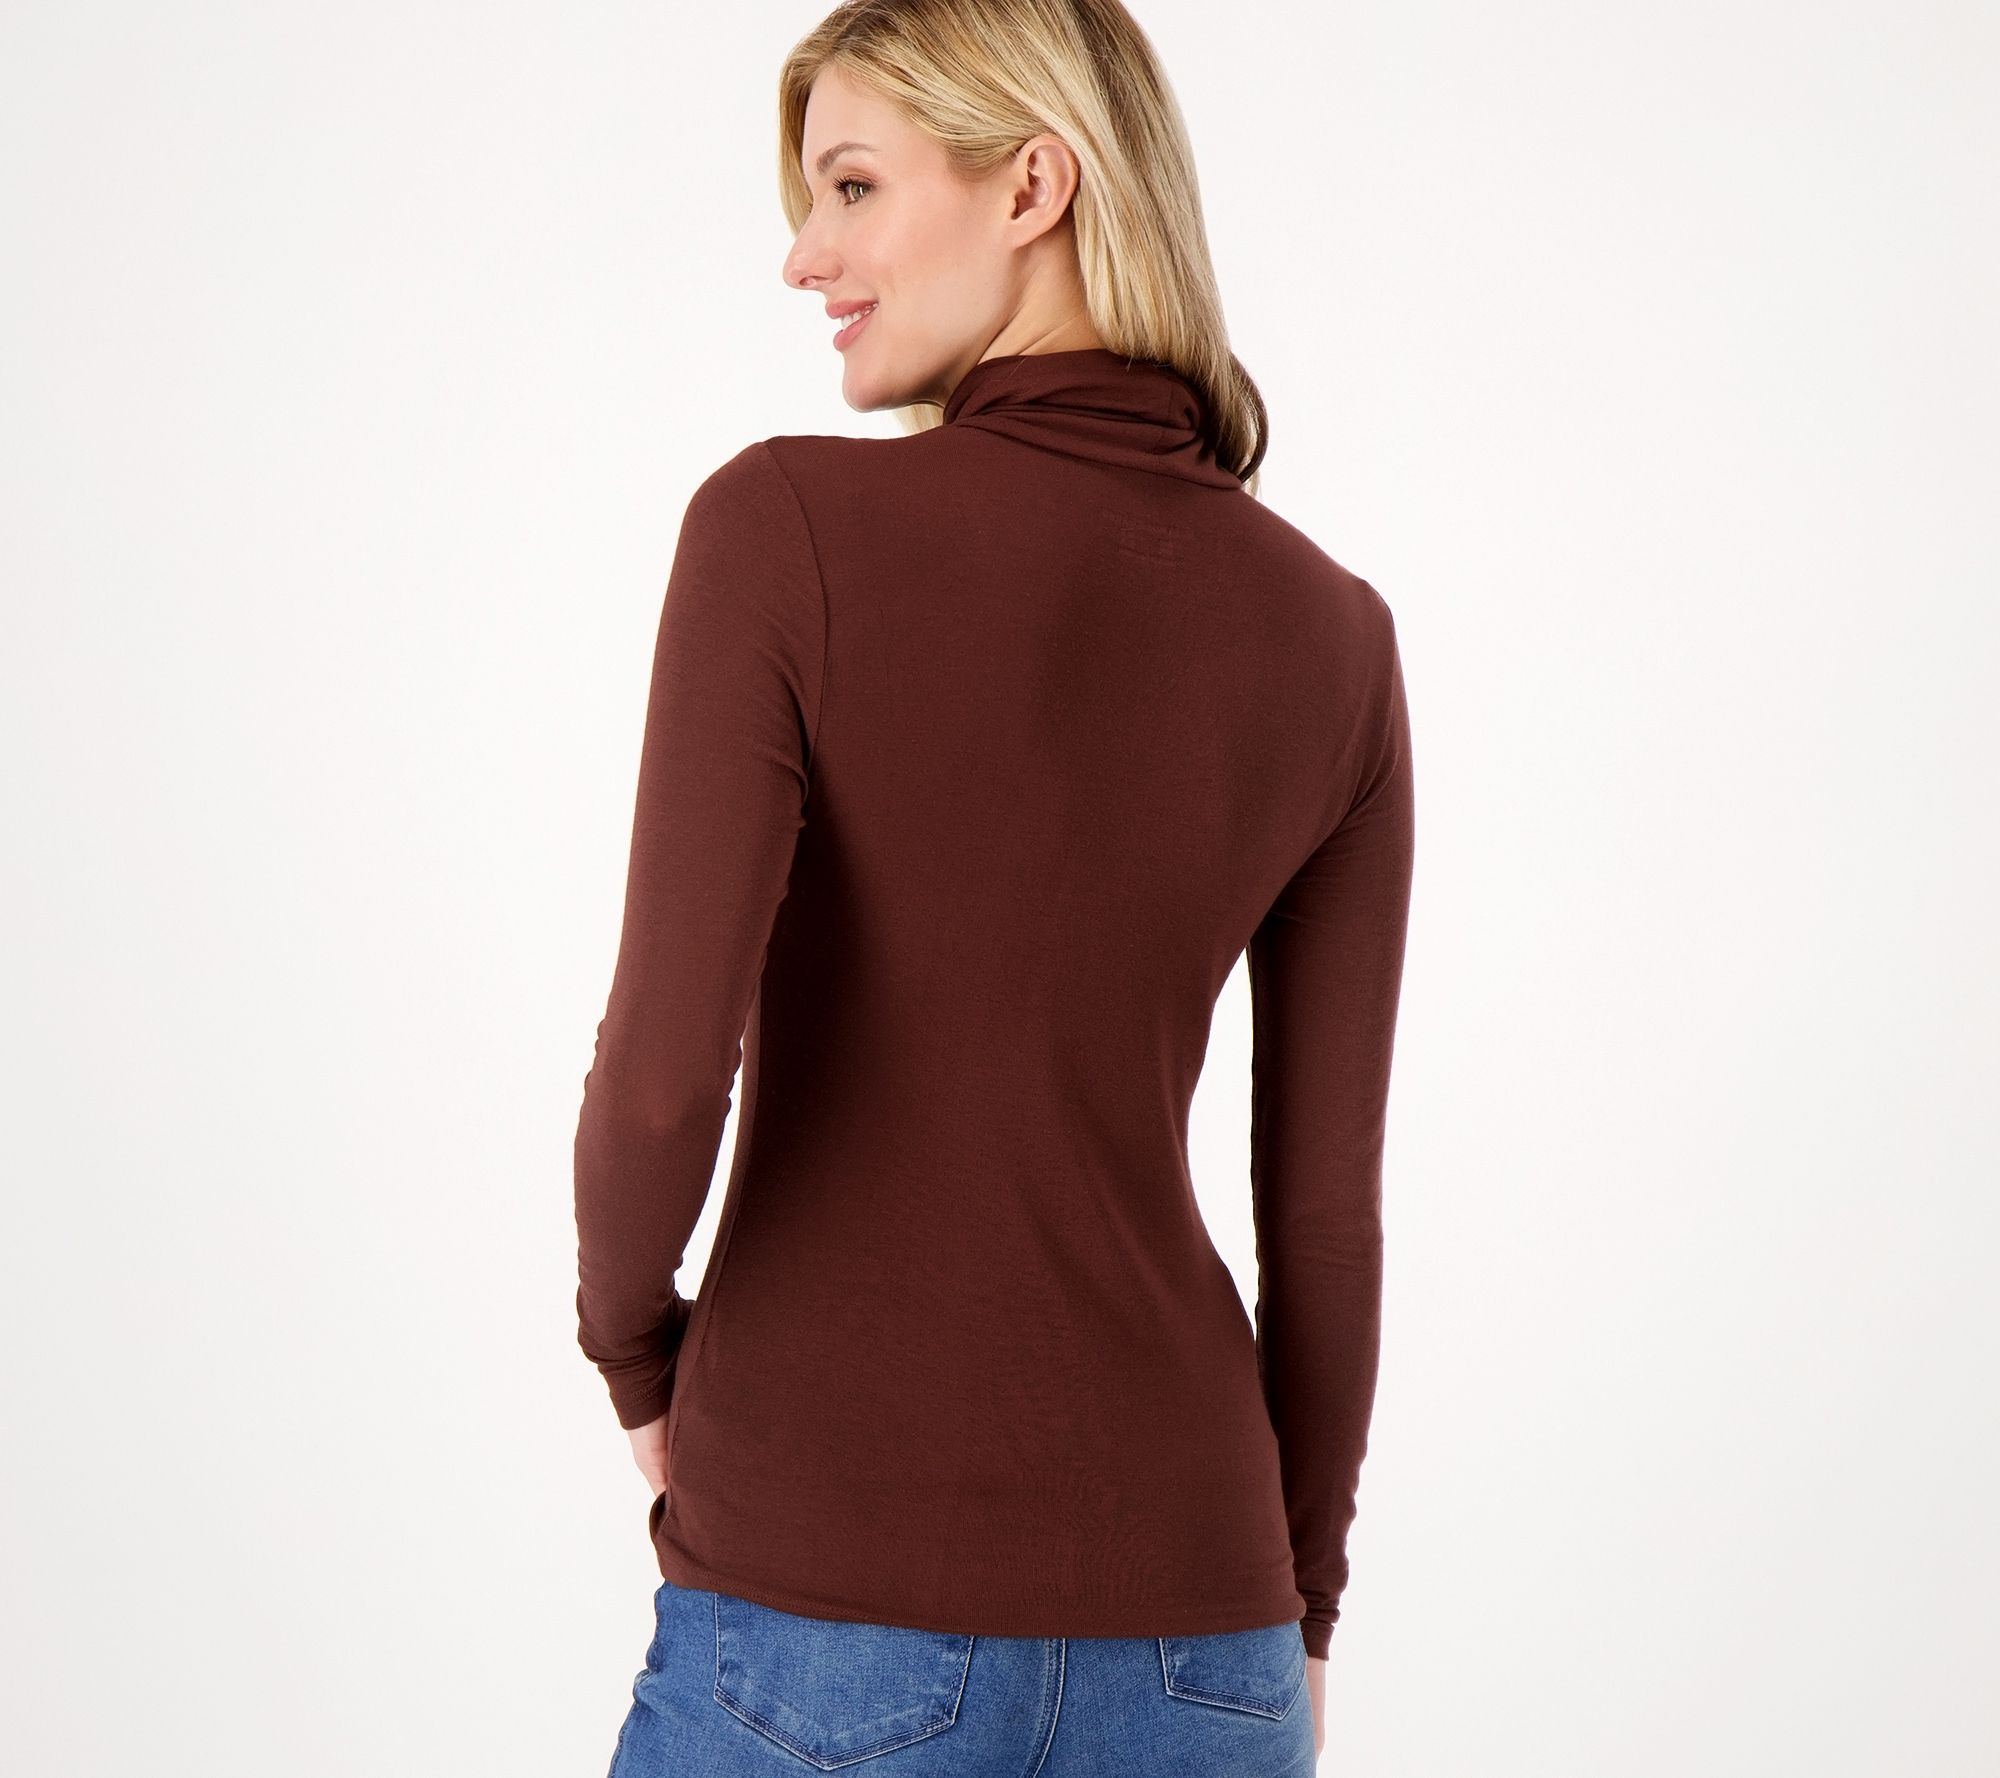 Girl With Curves Layering Turtleneck Tissue Tee - QVC.com